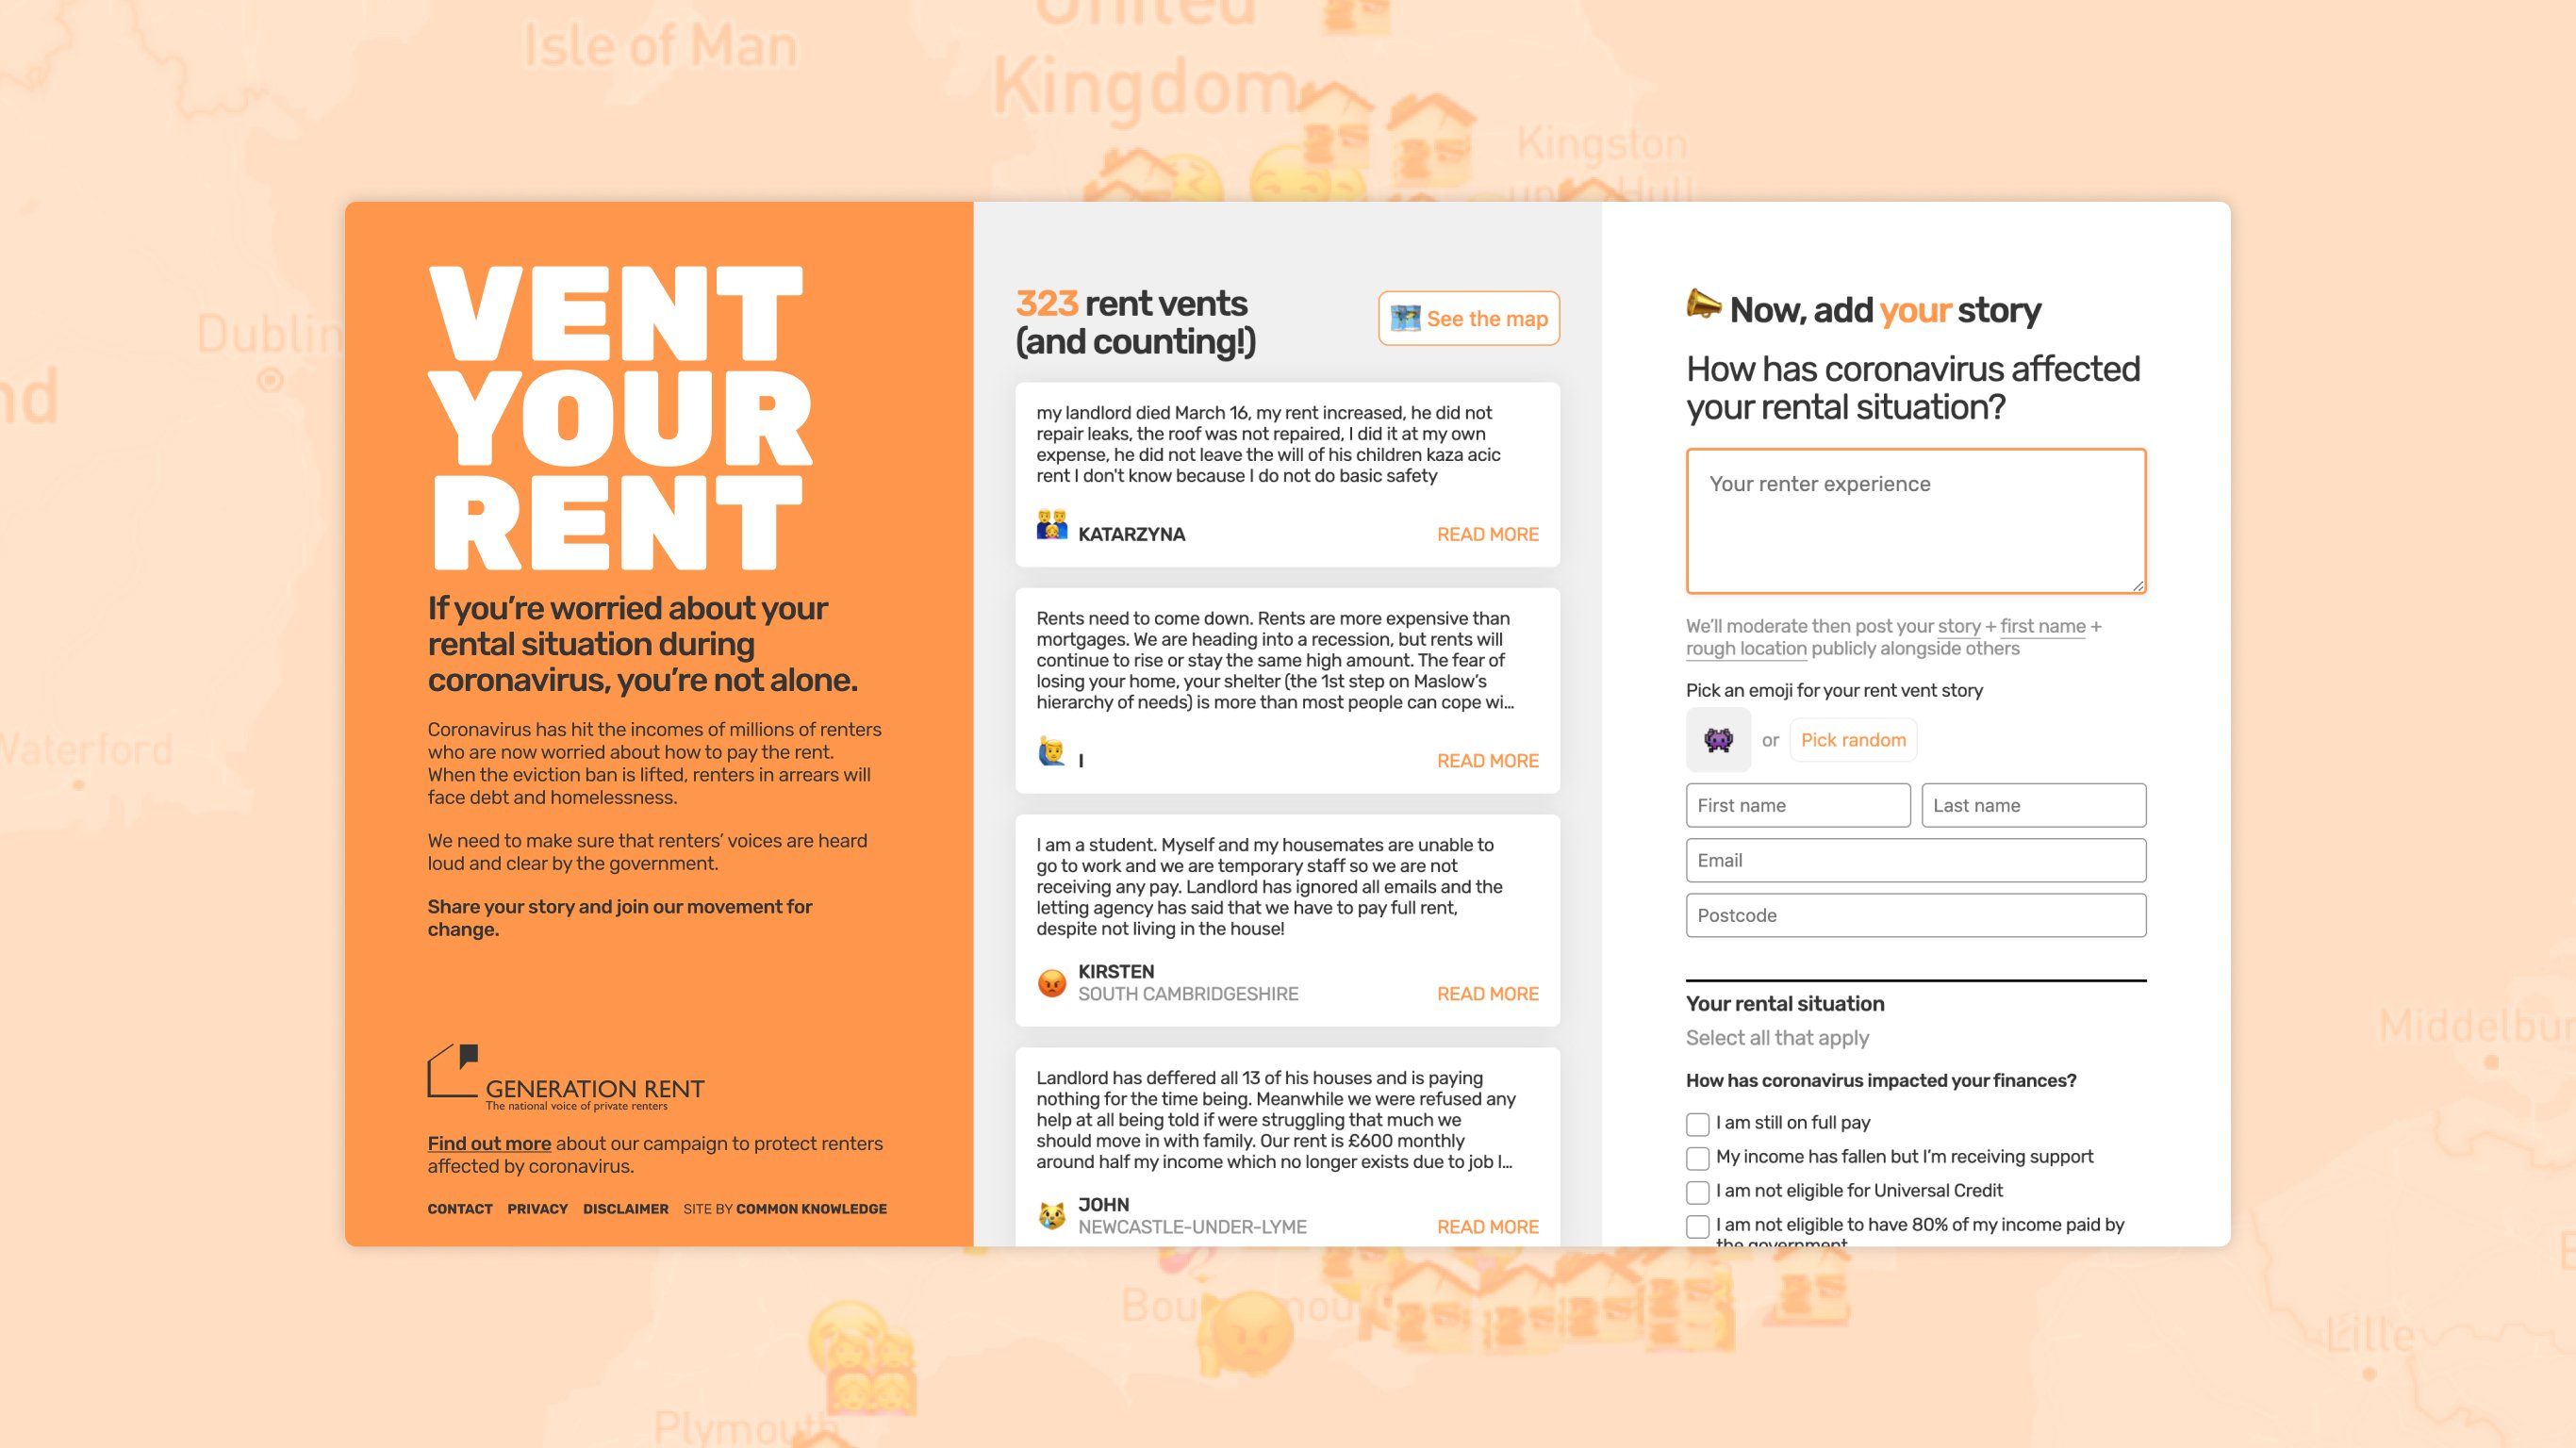 Home page of Vent Your Rent campaign, detailing tenant's experiences during lockdown